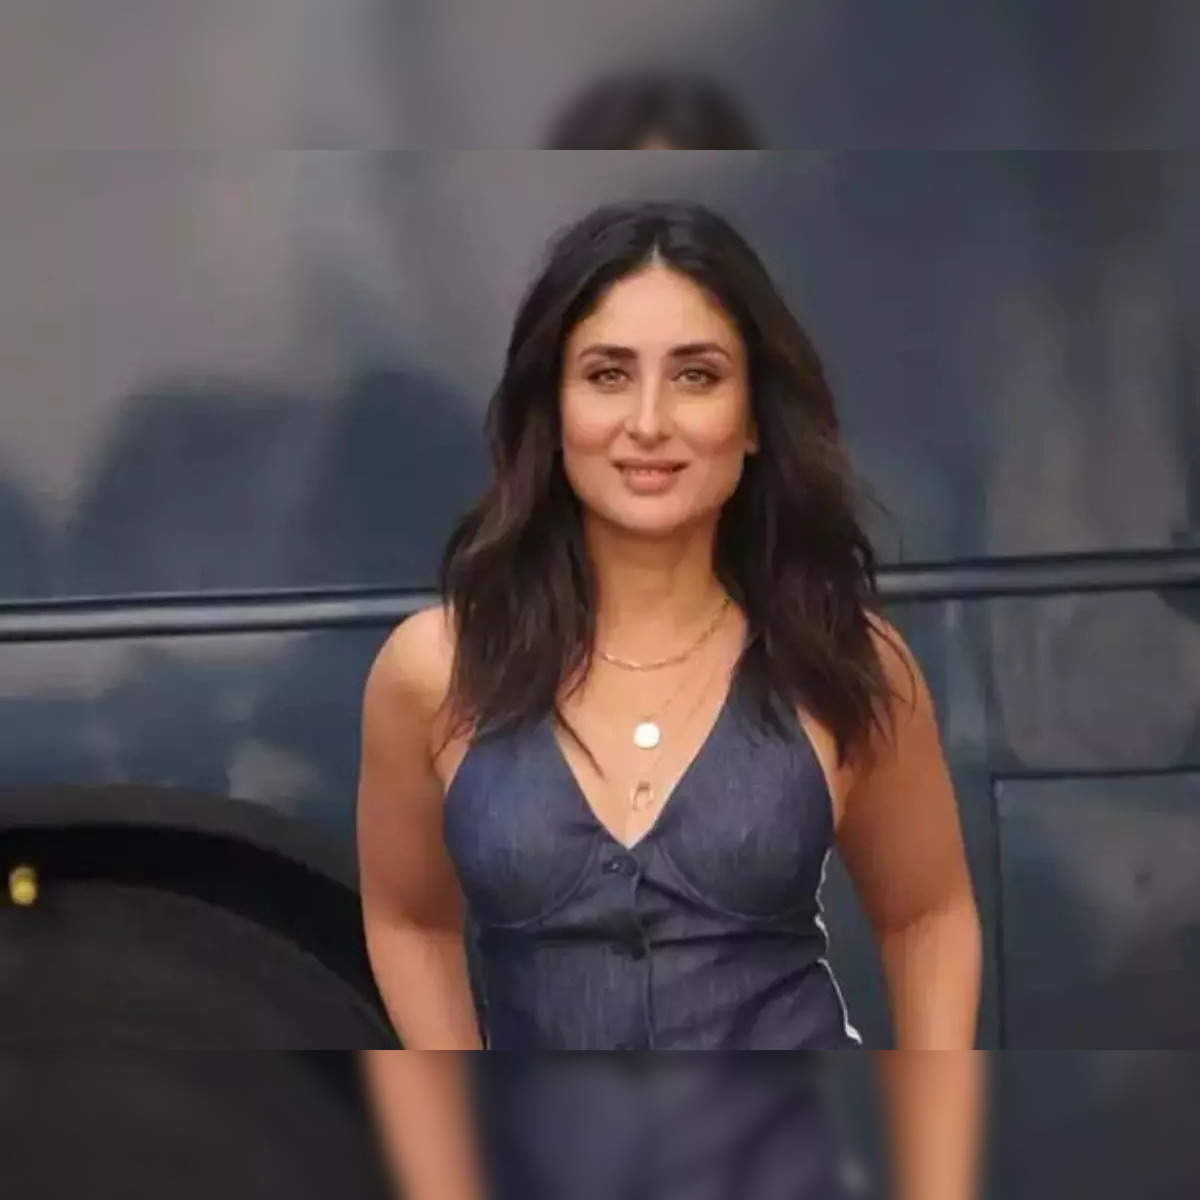 Newj Lend Wwwsexy Video - kareena: Kareena Kapoor Khan reveals she wants to lead an action franchise:  'I know I will be good at it!' - The Economic Times